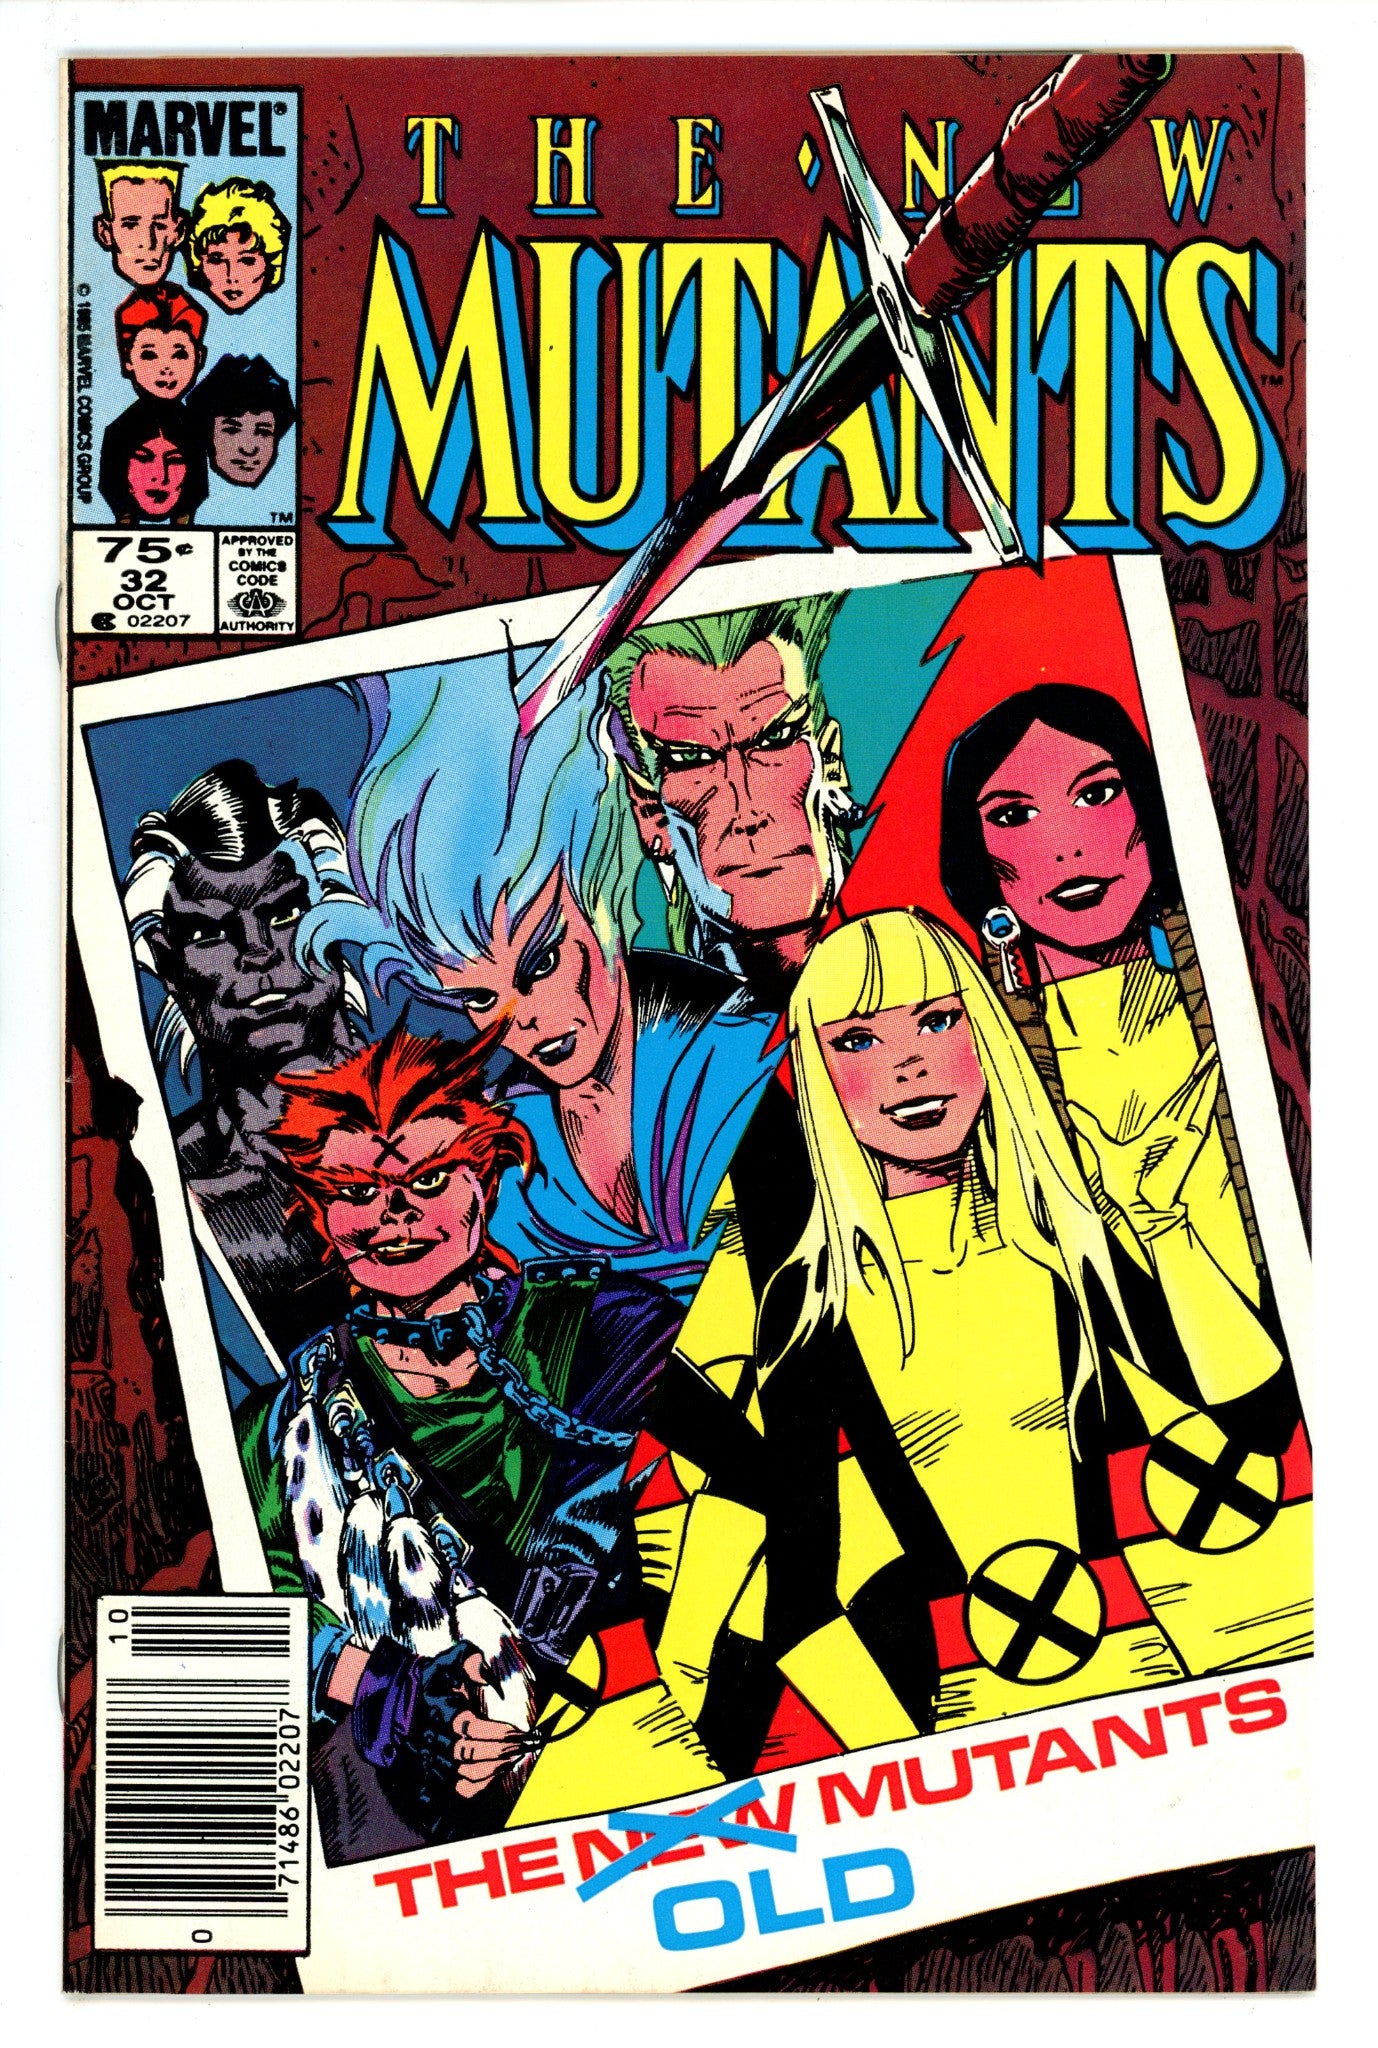 The New Mutants Vol 1 32 FN- (5.5) (1985) Canadian Price Variant 